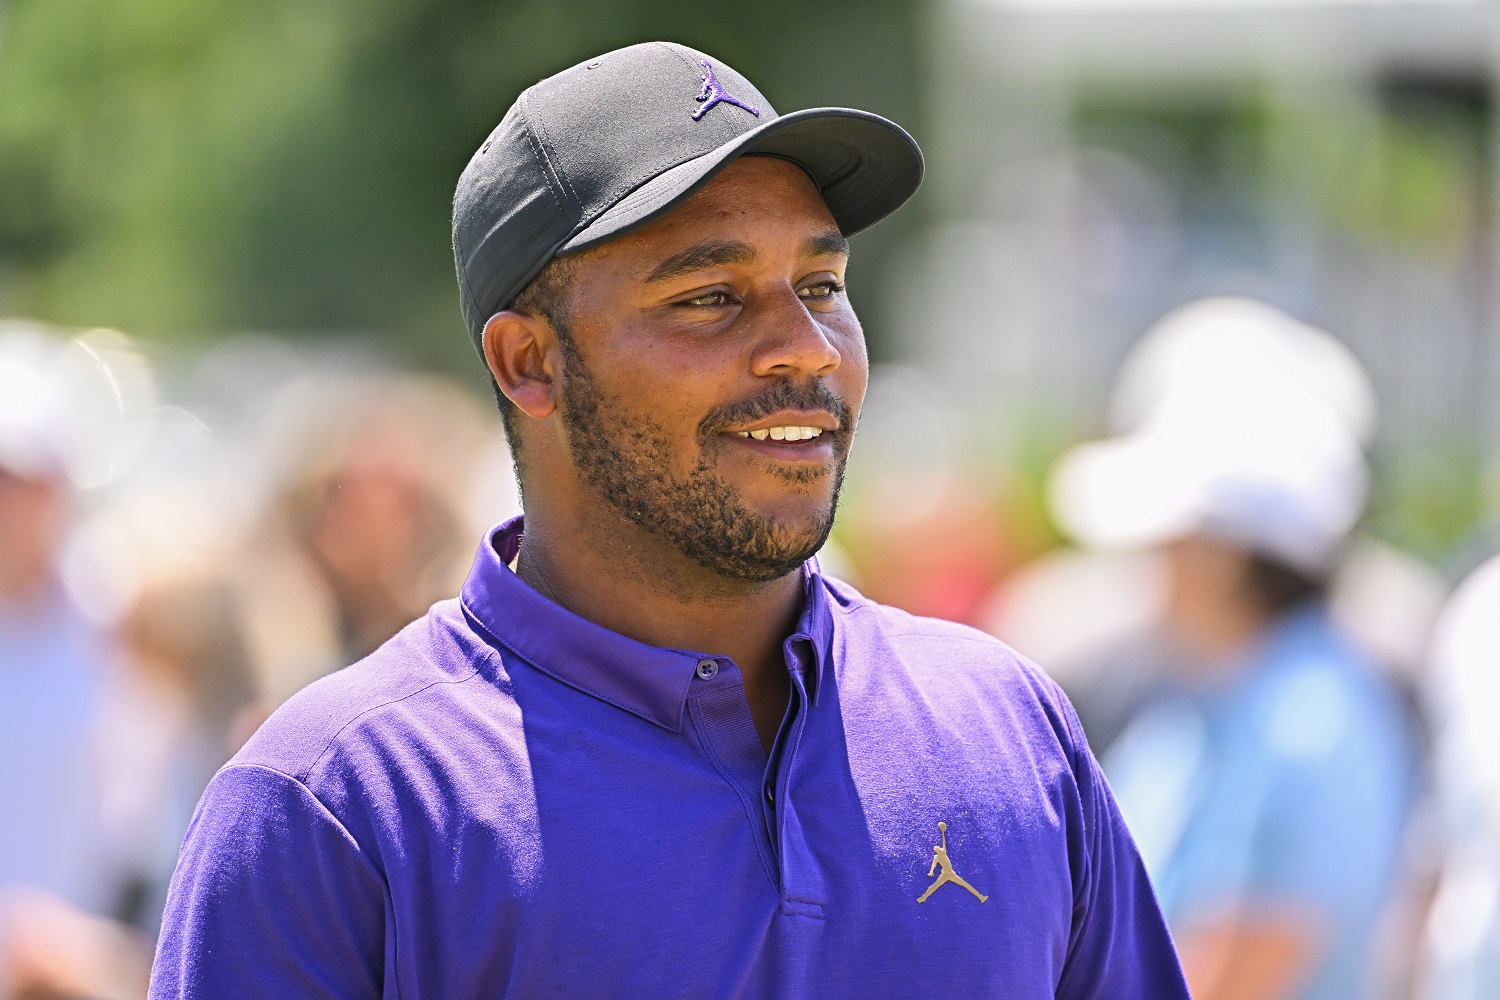 Harold Varner III walks on the 10th tee box during the final round of the Charles Schwab Challenge at Colonial Country Club on May 29, 2022. | Ben Jared/PGA Tour via Getty Images